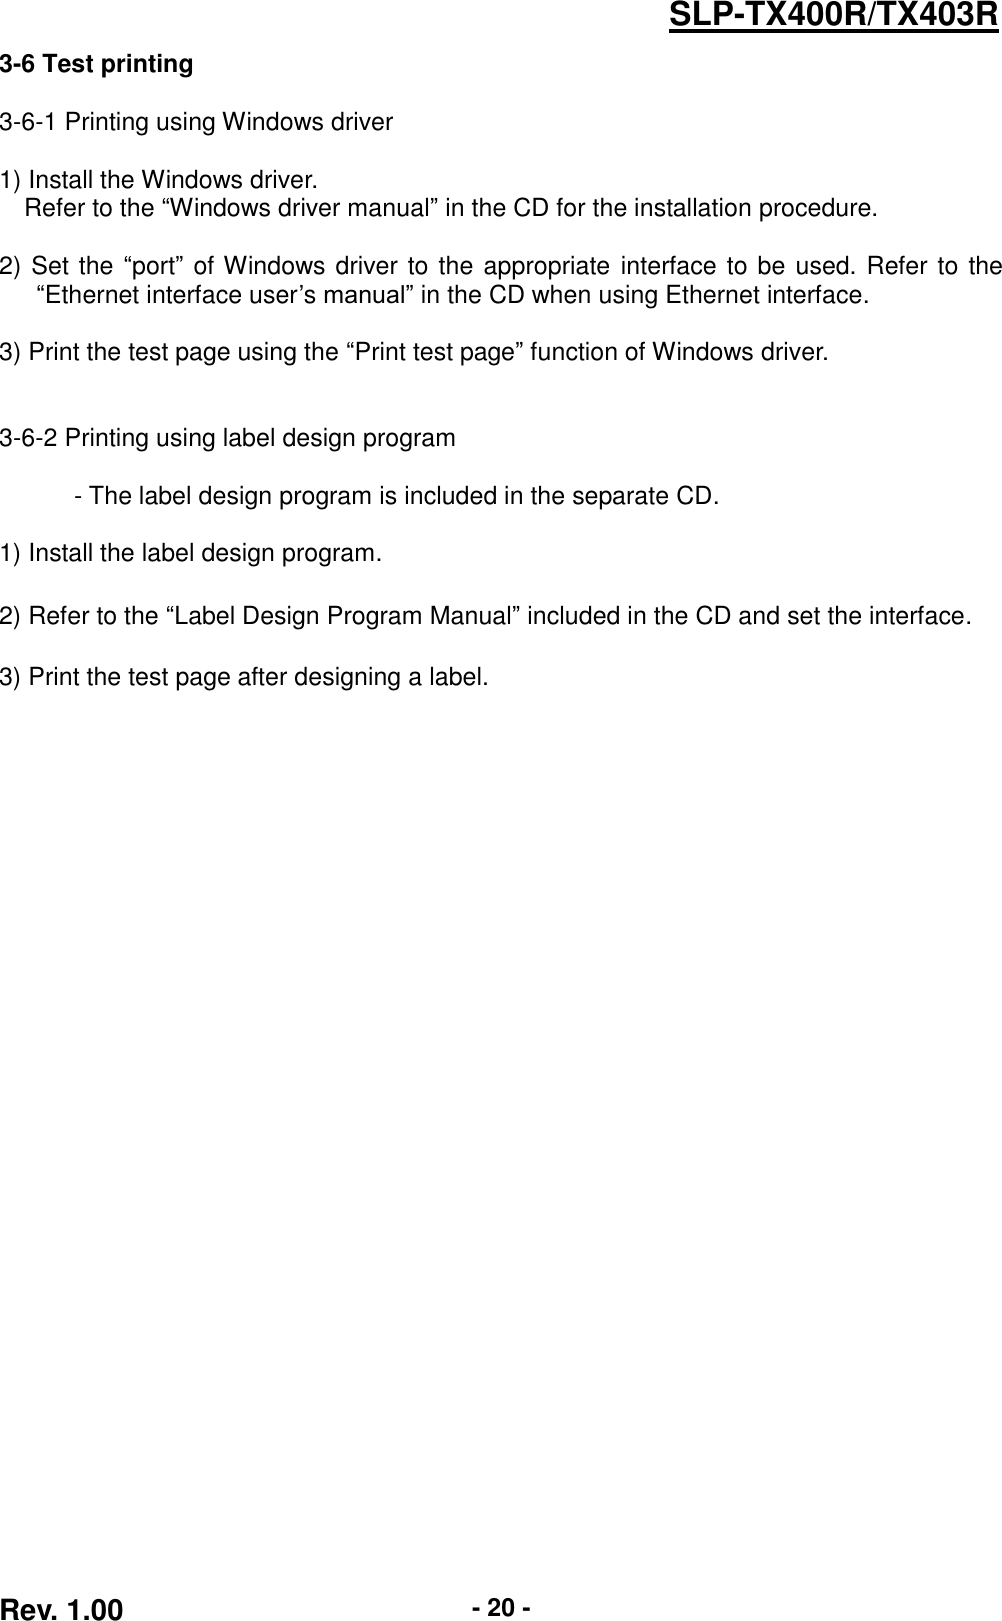  Rev. 1.00 - 20 - SLP-TX400R/TX403R 3-6 Test printing  3-6-1 Printing using Windows driver  1) Install the Windows driver. Refer to the “Windows driver manual” in the CD for the installation procedure.  2) Set the “port” of Windows driver to the appropriate interface to be used. Refer to the “Ethernet interface user’s manual” in the CD when using Ethernet interface.  3) Print the test page using the “Print test page” function of Windows driver.     3-6-2 Printing using label design program  - The label design program is included in the separate CD.  1) Install the label design program.  2) Refer to the “Label Design Program Manual” included in the CD and set the interface.  3) Print the test page after designing a label. 